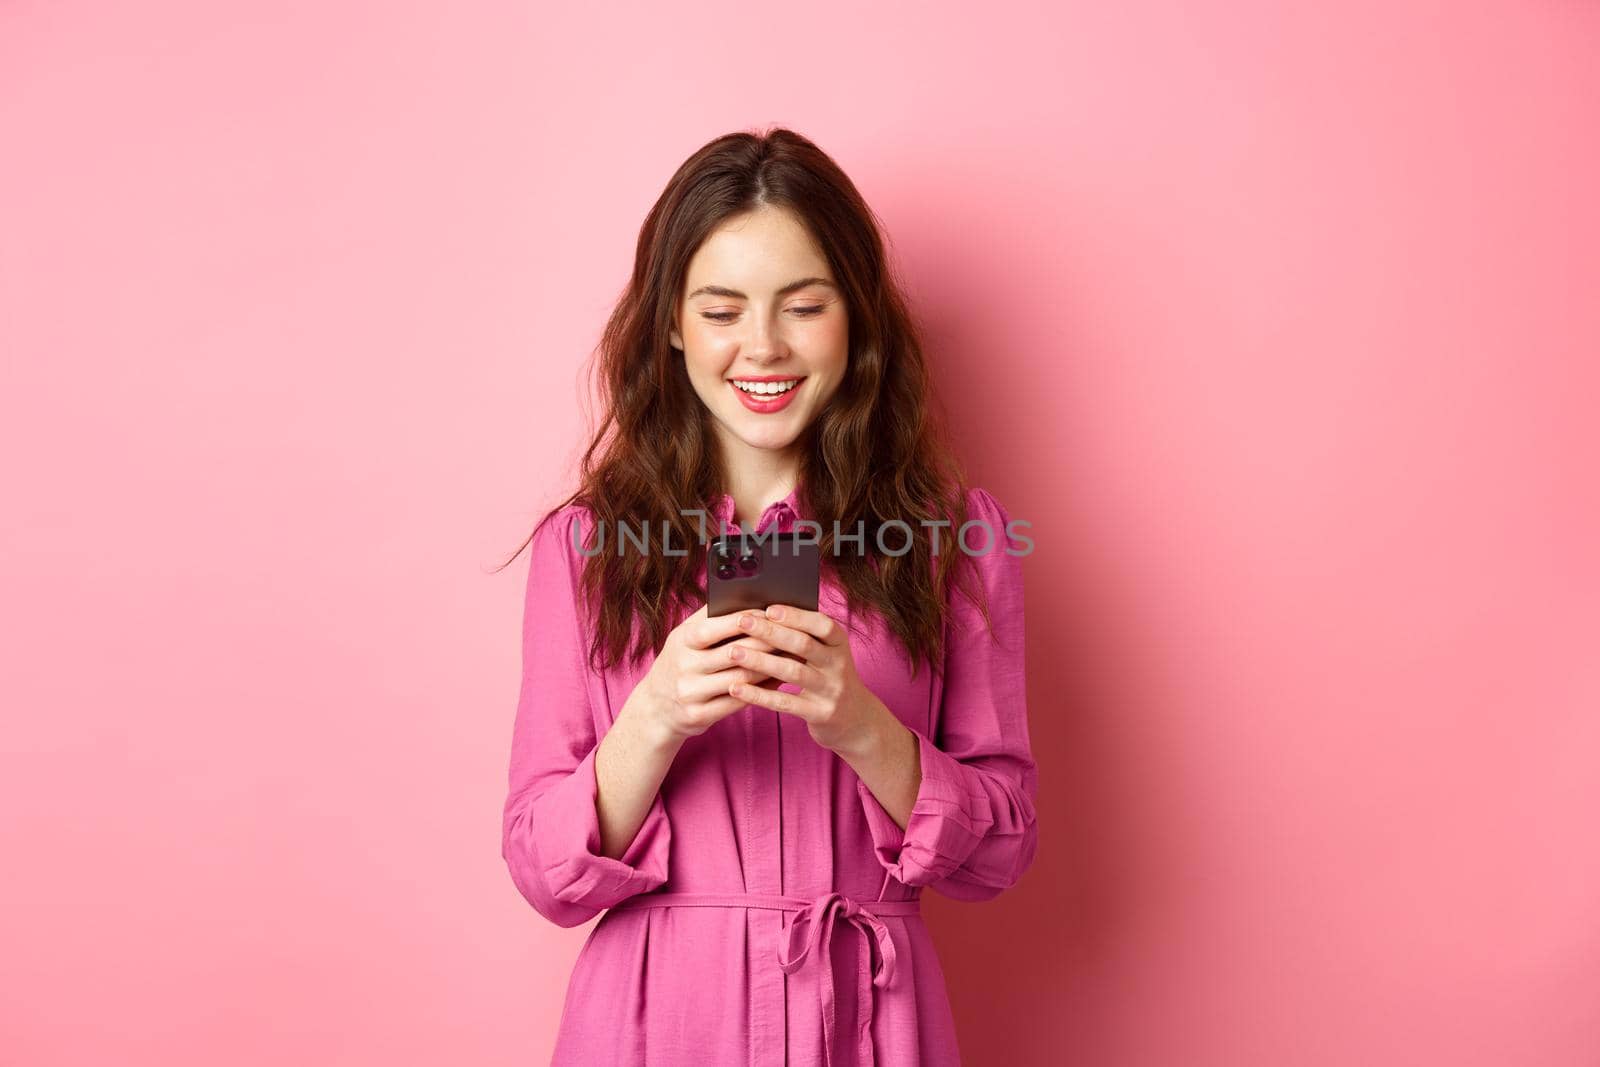 Young woman shopping, chatting on mobile phone, smiling while reading smartphone screen, standing against pink background. Copy space